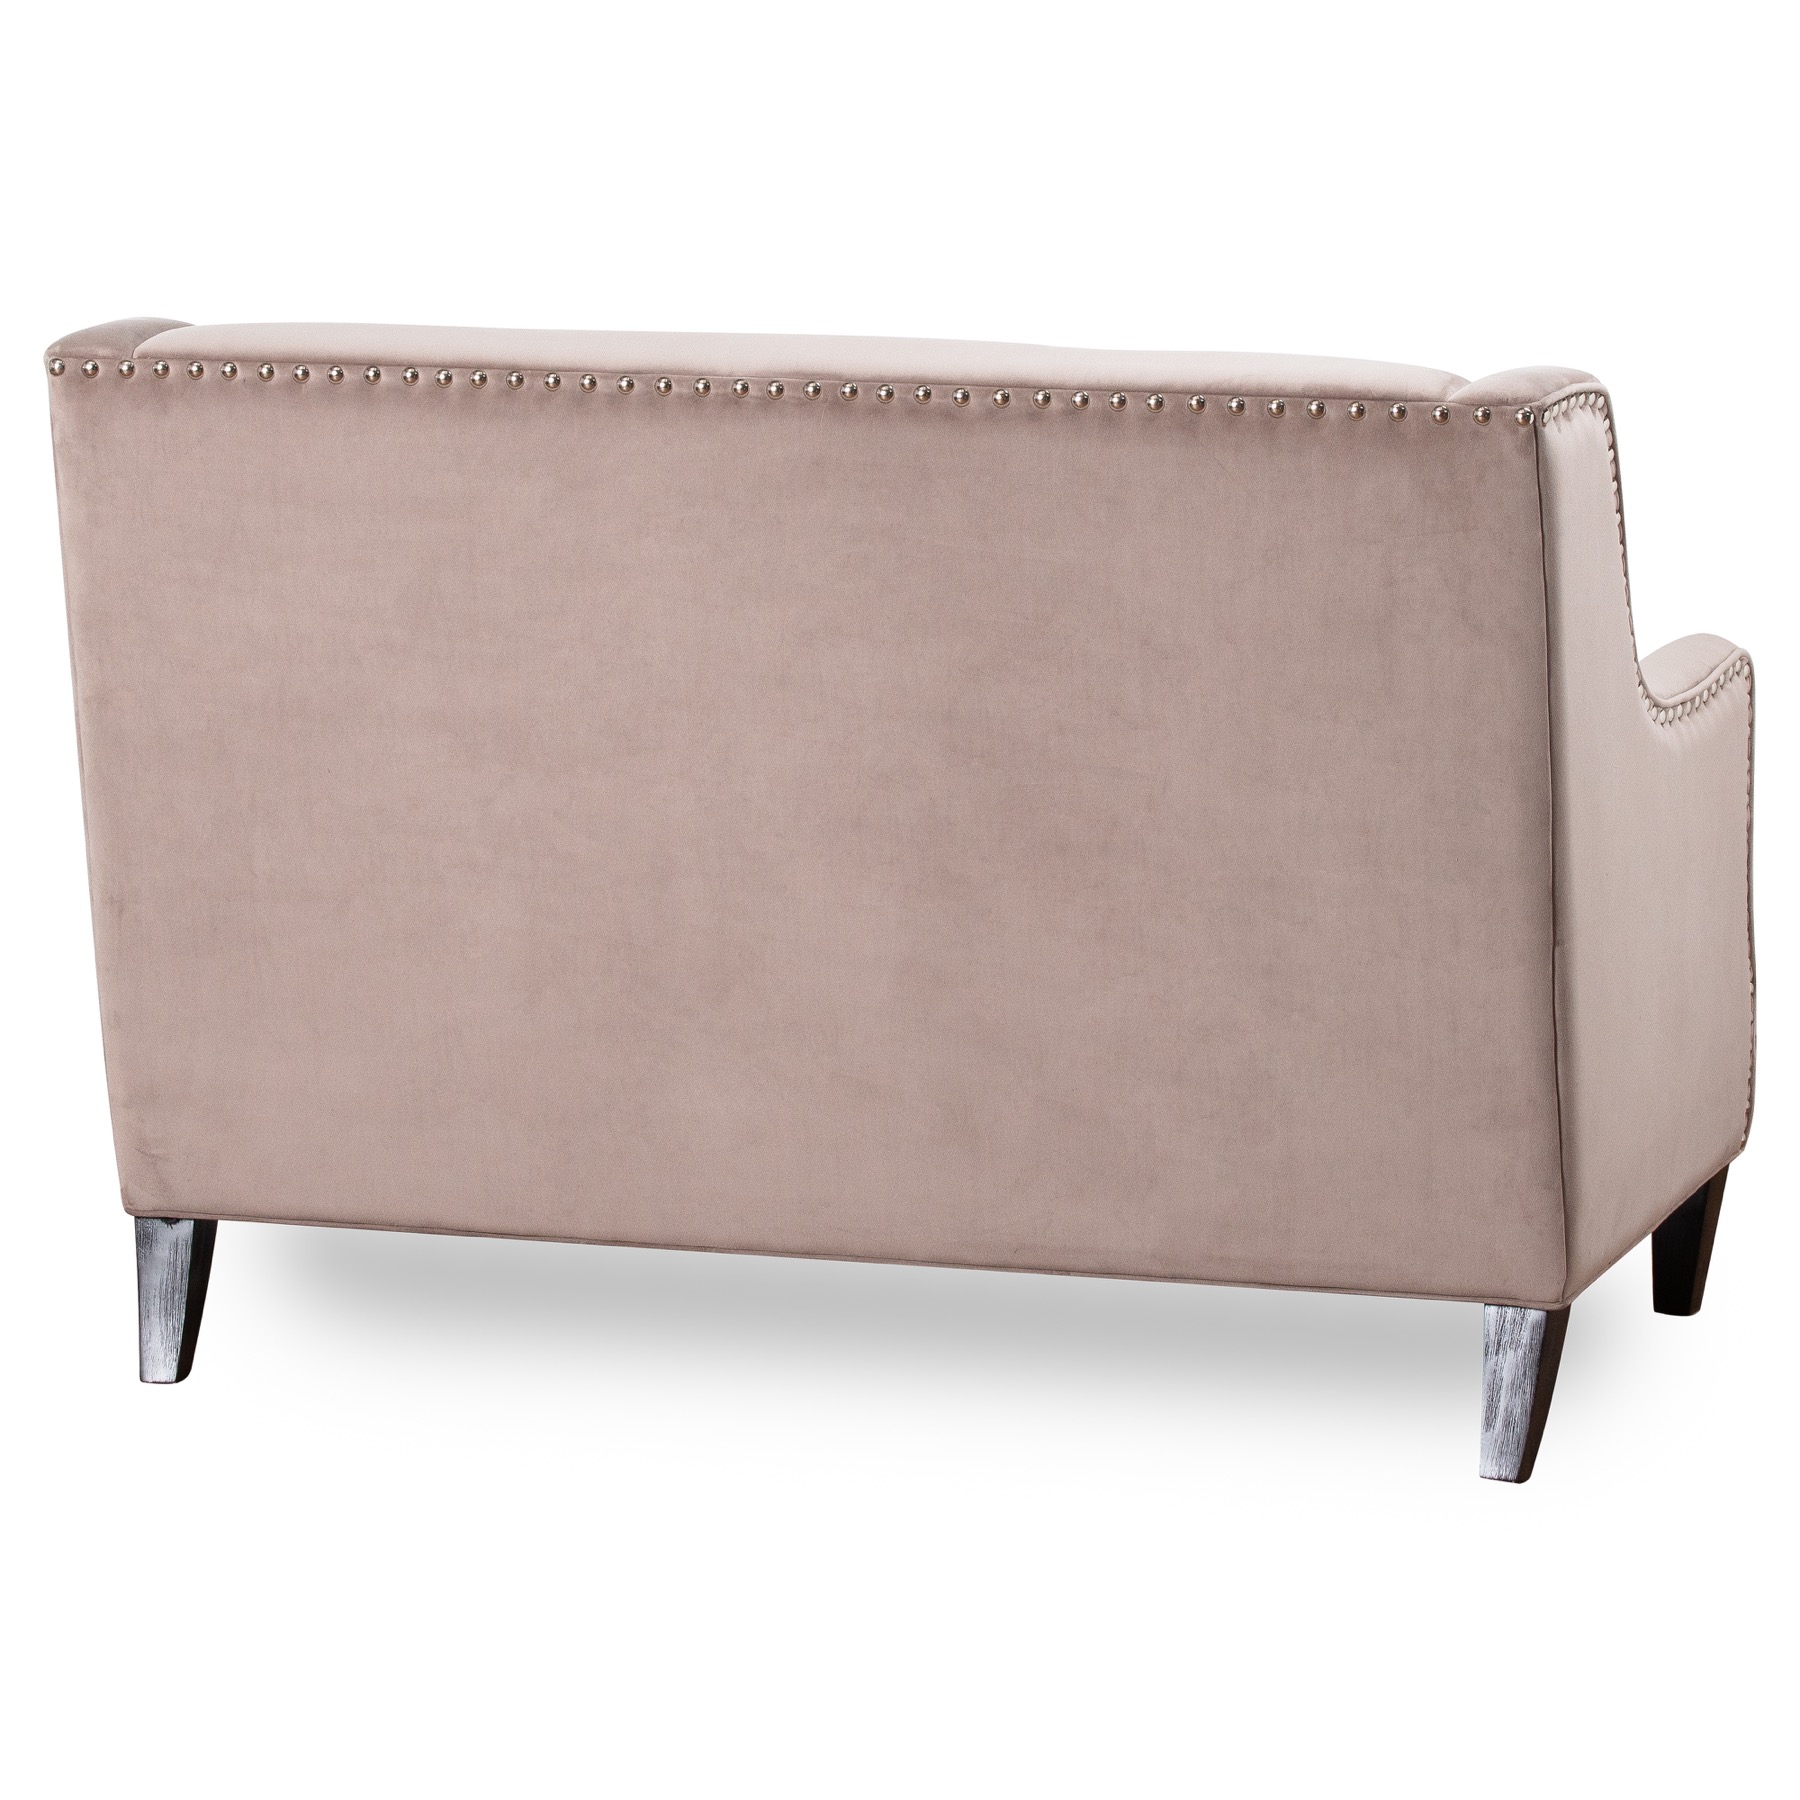 Chelsea Studded Two Seater Sofa - Image 5